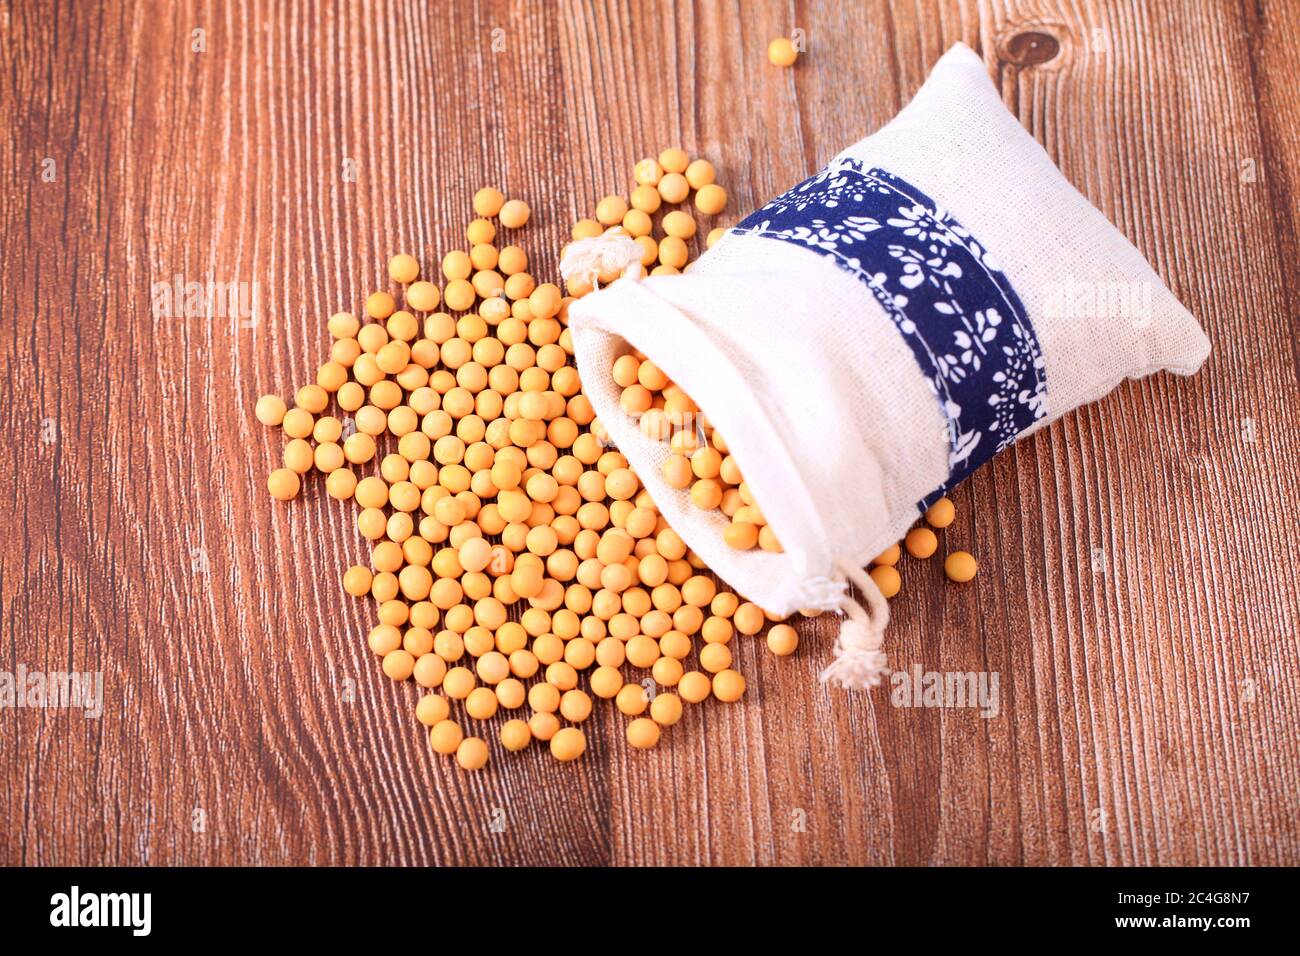 The soybean are on the wooden table Stock Photo